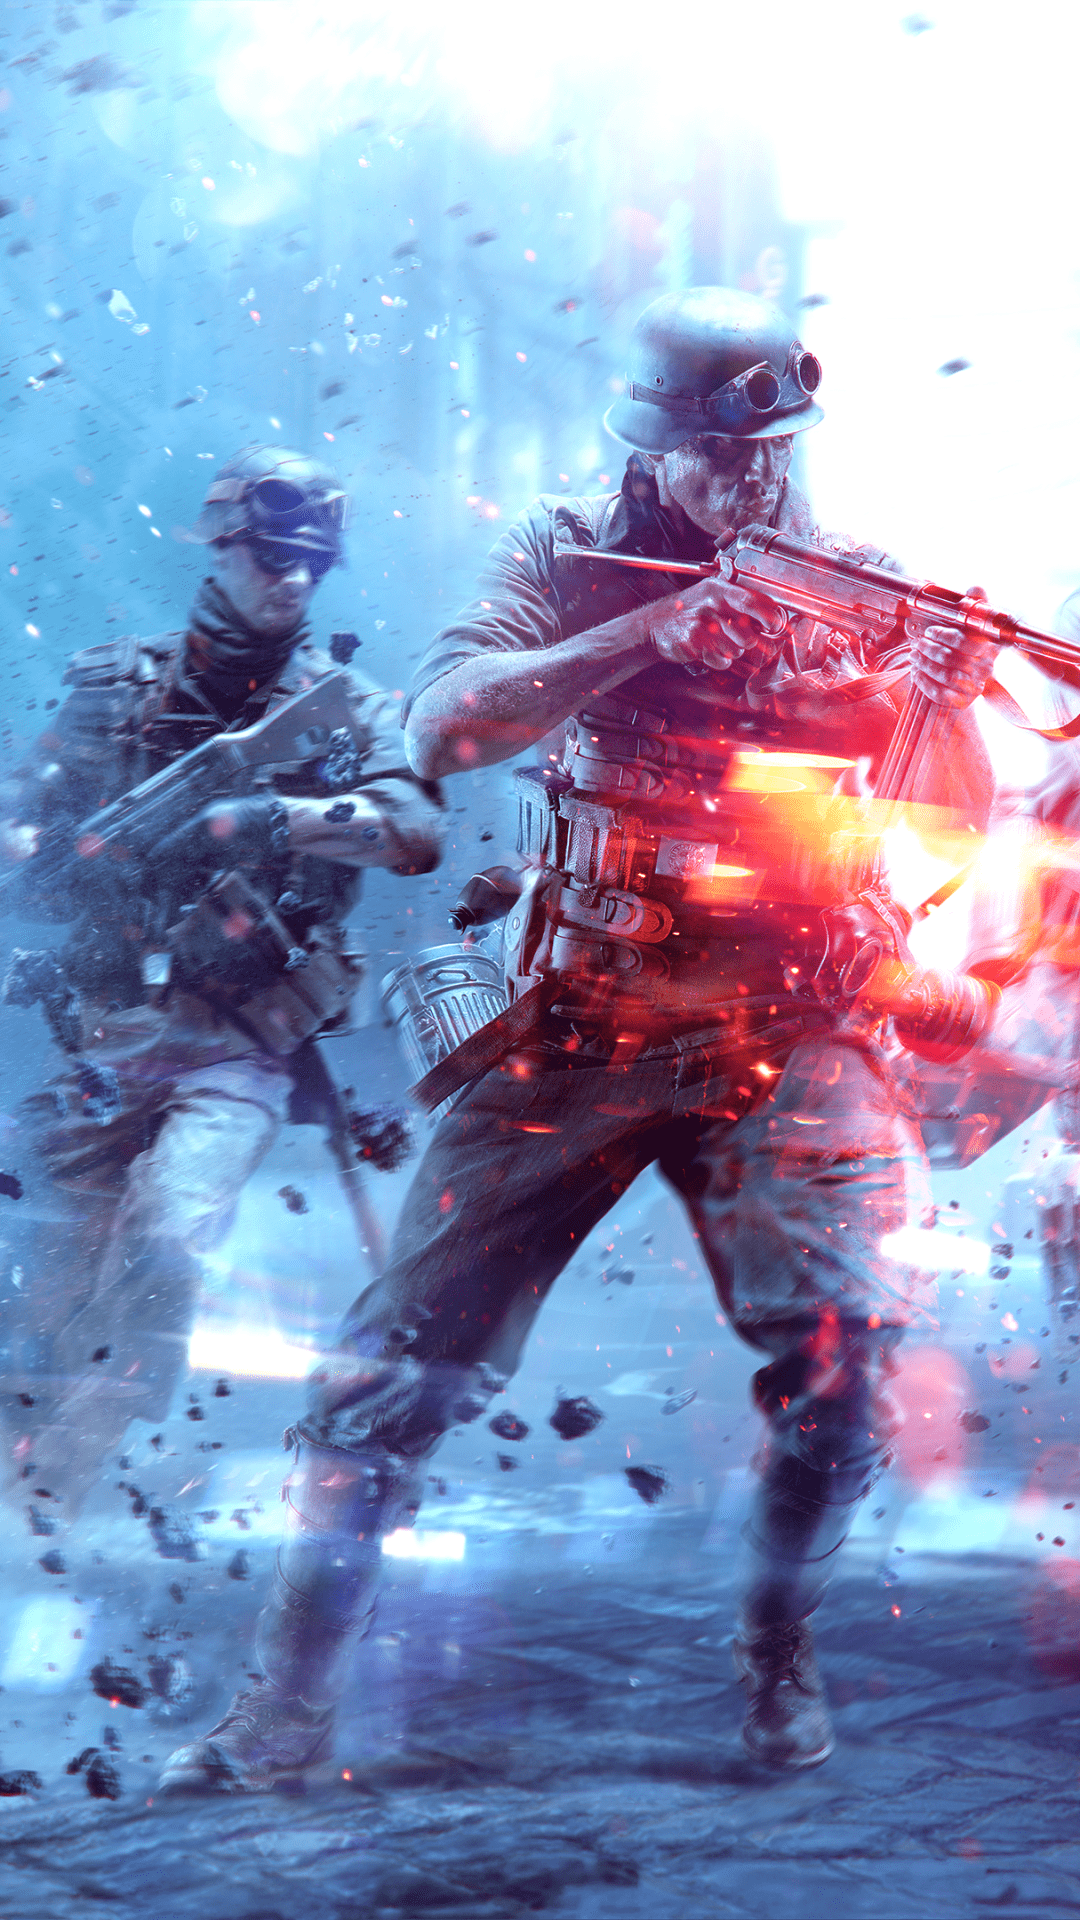 Bfv Wallpapers Top Free Bfv Backgrounds Wallpaperaccess